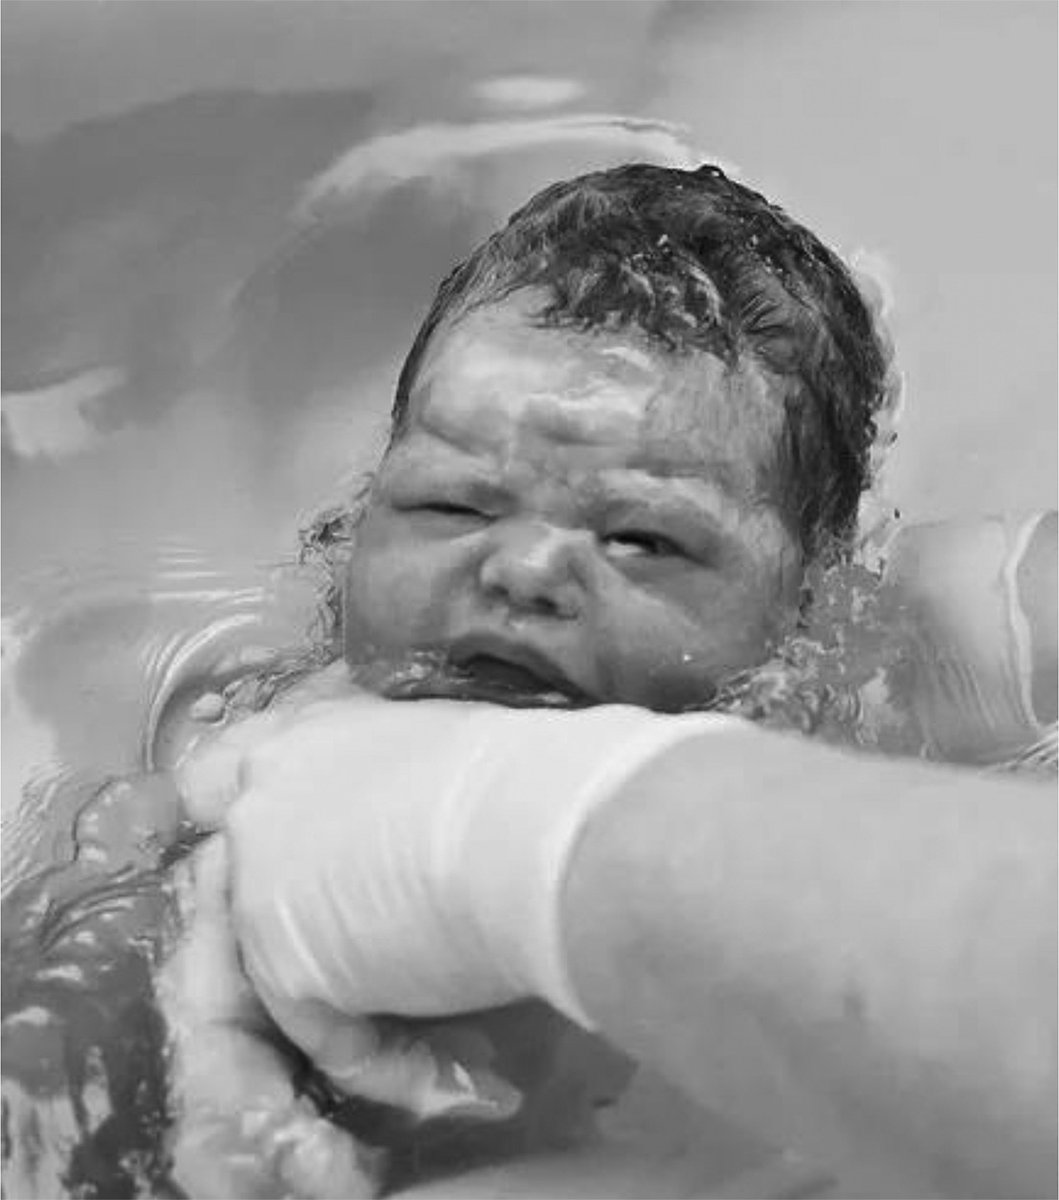 AJOG Expert Review in Labor: Water birth: a systematic review and meta-analysis of maternal and neonatal outcomes ow.ly/nr7O50R9Nzi